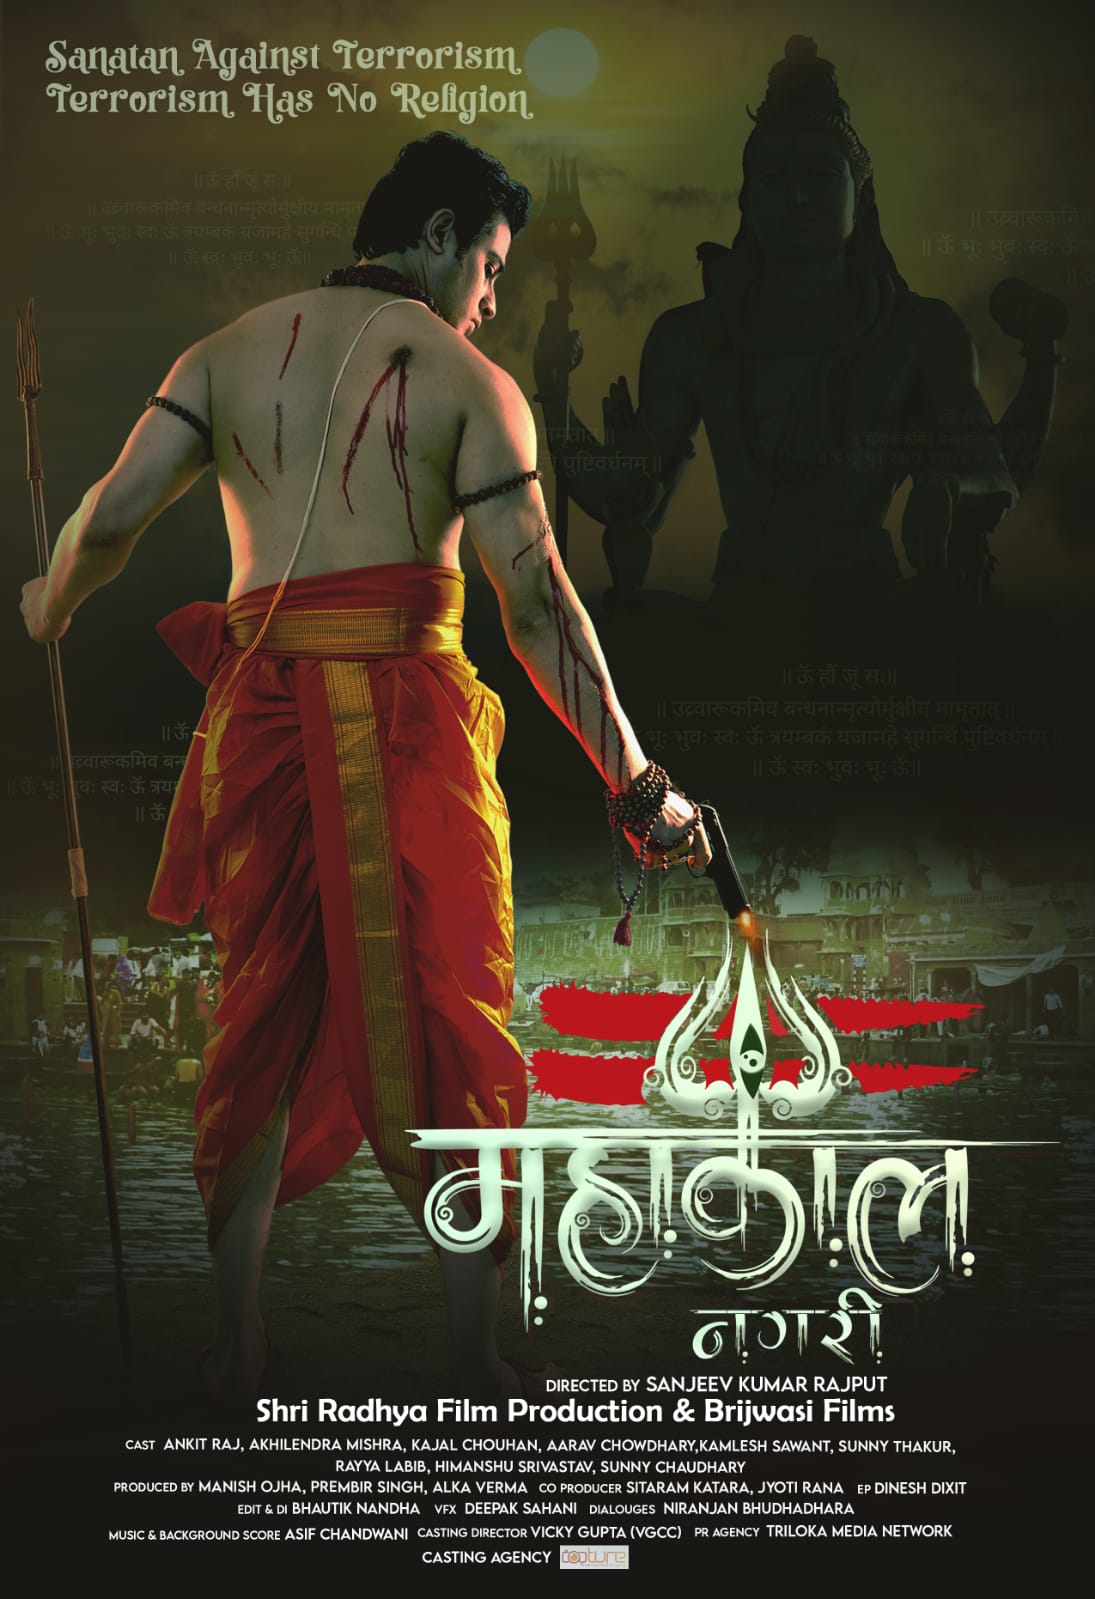 The first look of the film 'Mahakal Nagari' is out